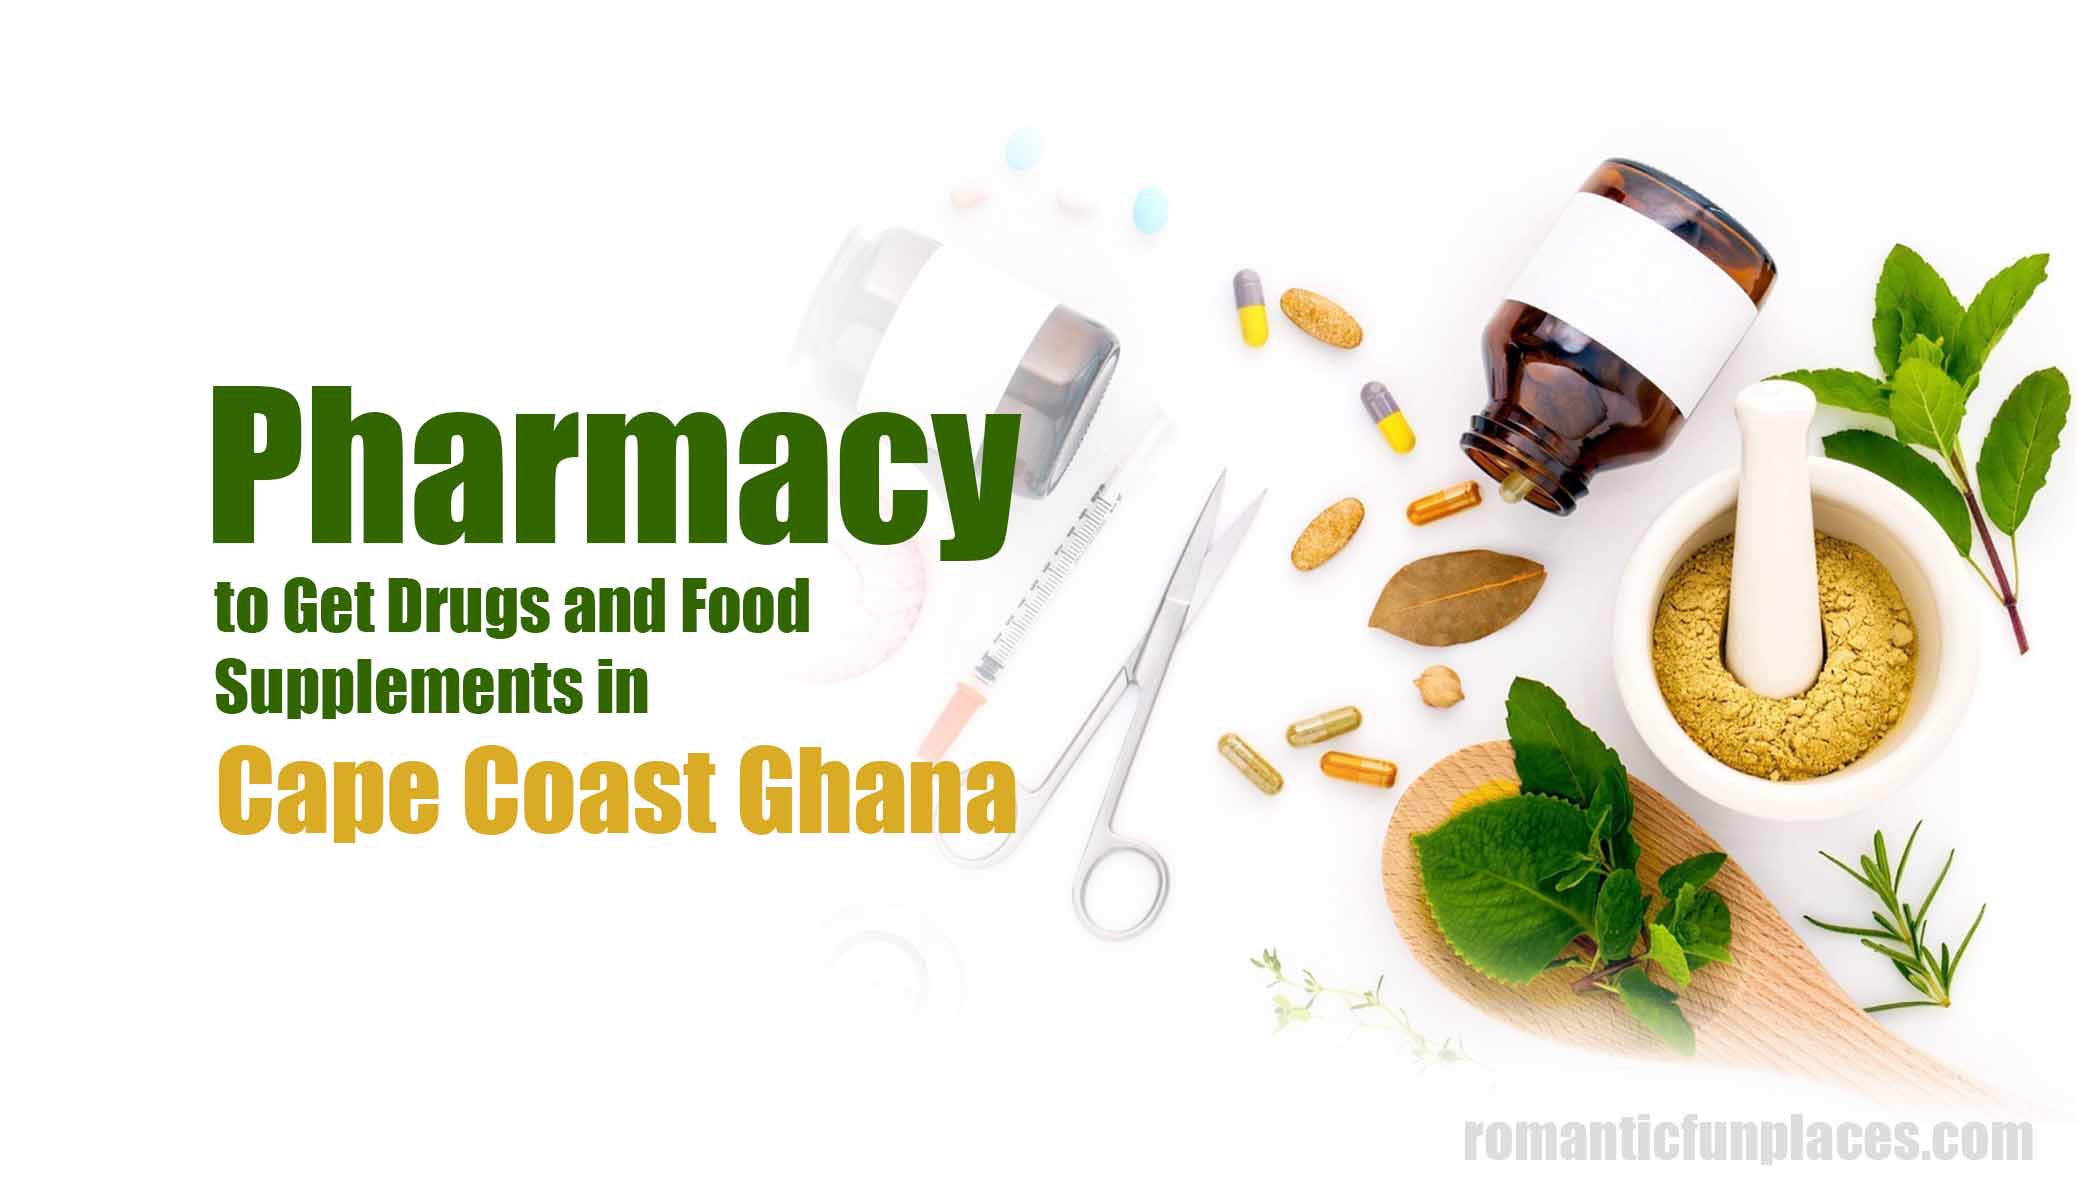 Pharmacy to Get Drugs and Food Supplements in Cape Coast Ghana